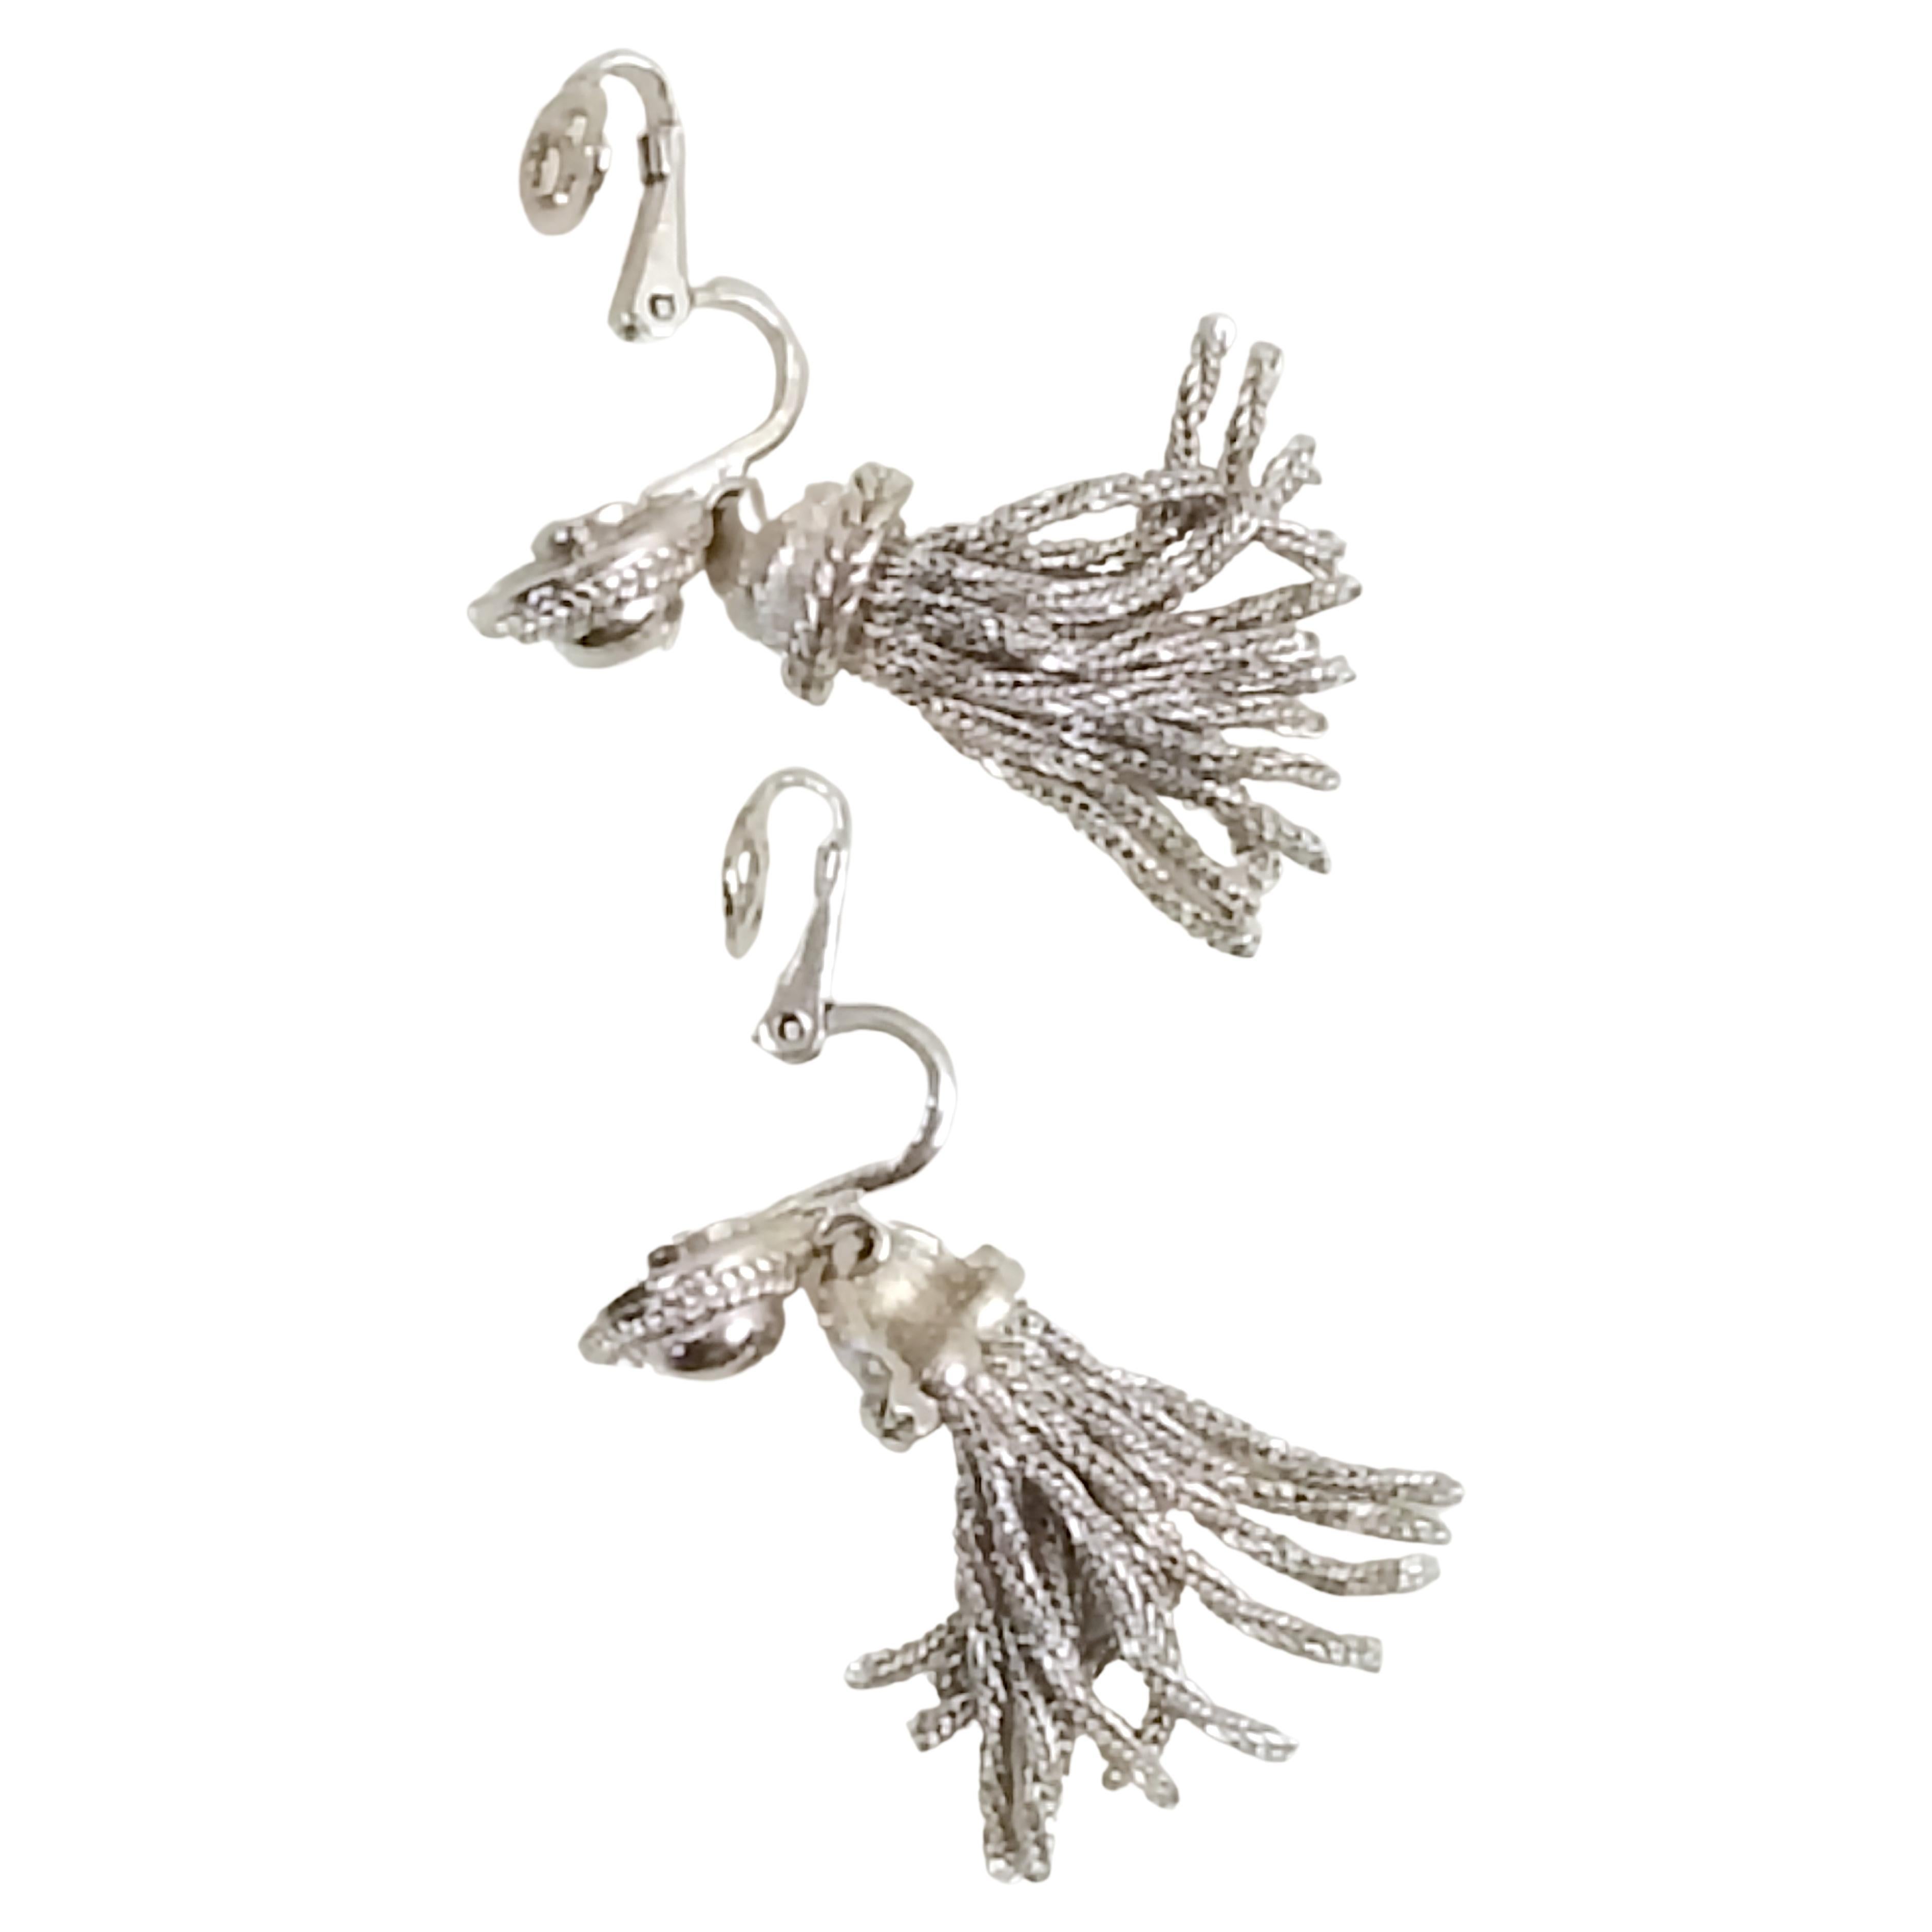 Trifari AlfredPhilippe 1948-1954 RhodiumPlated Tassel Chain FrenchClip Earrings In Excellent Condition For Sale In Chicago, IL